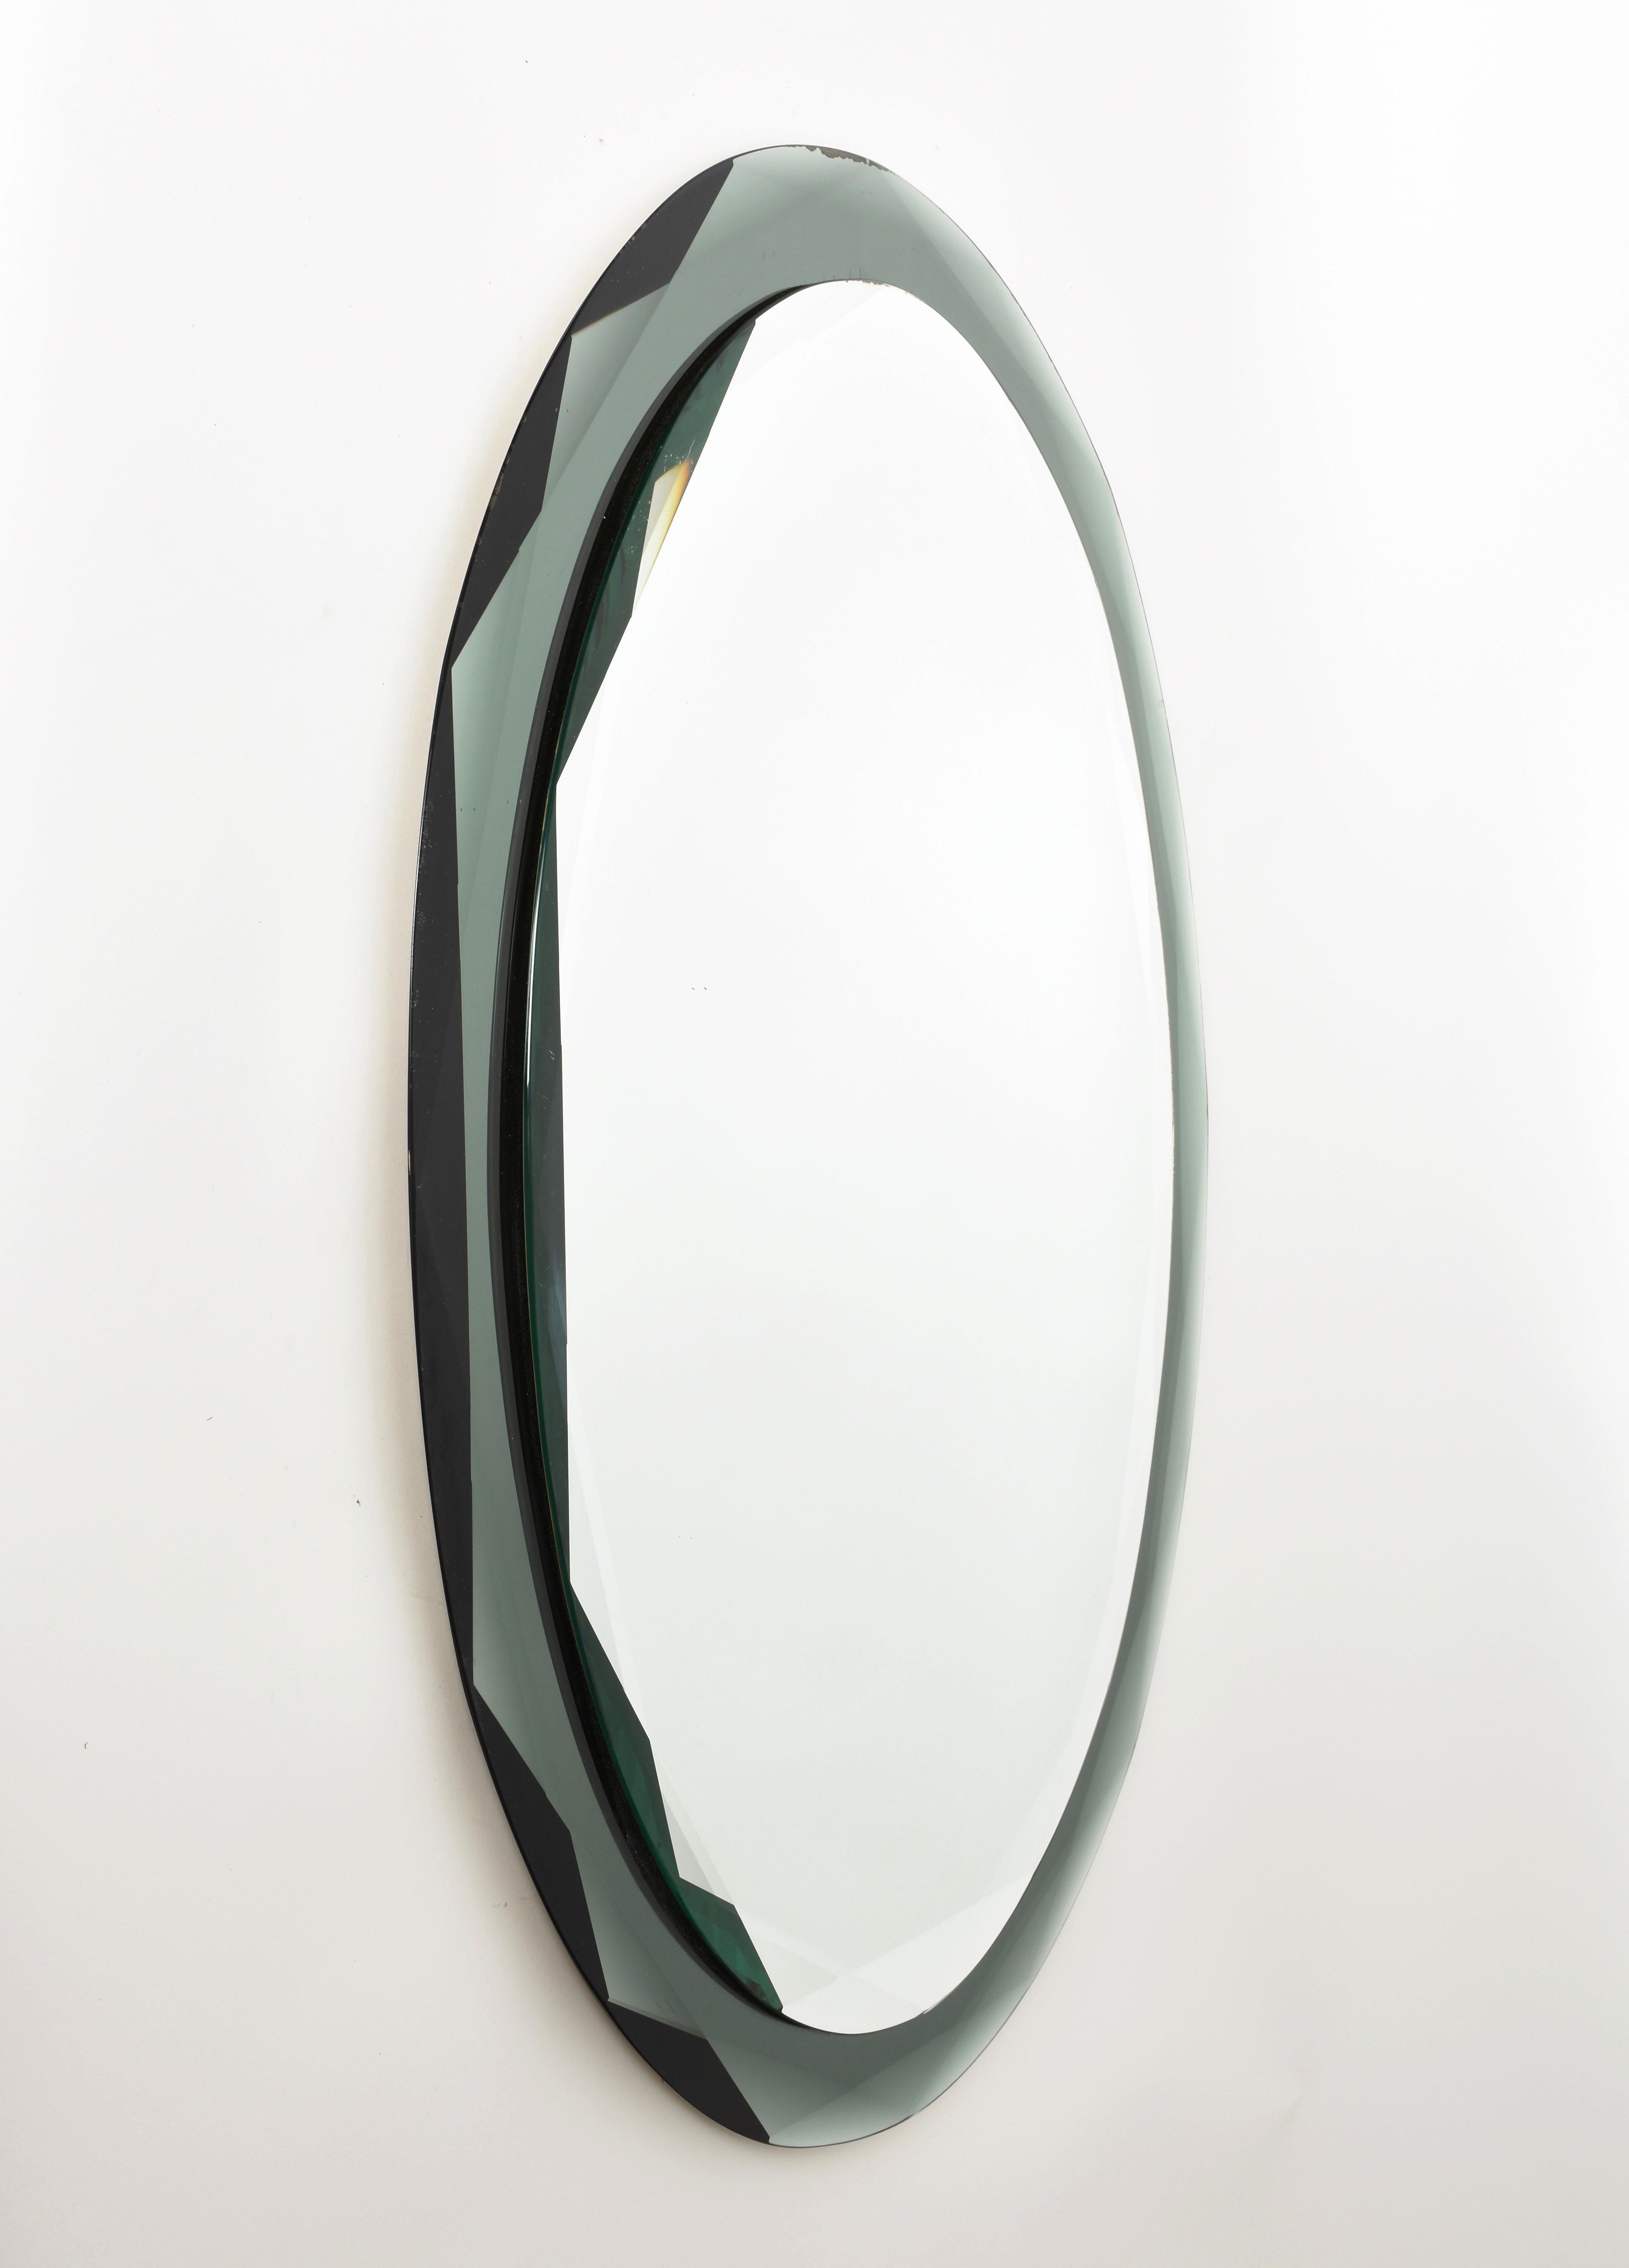 Incredible midcentury oval double-layer green and crystal scalloped wall mirror. This masterpiece was produced by Santambrogio & De Berti during 1950s in Italy.

This one of a kind piece of art is unique as it has a double-layered 